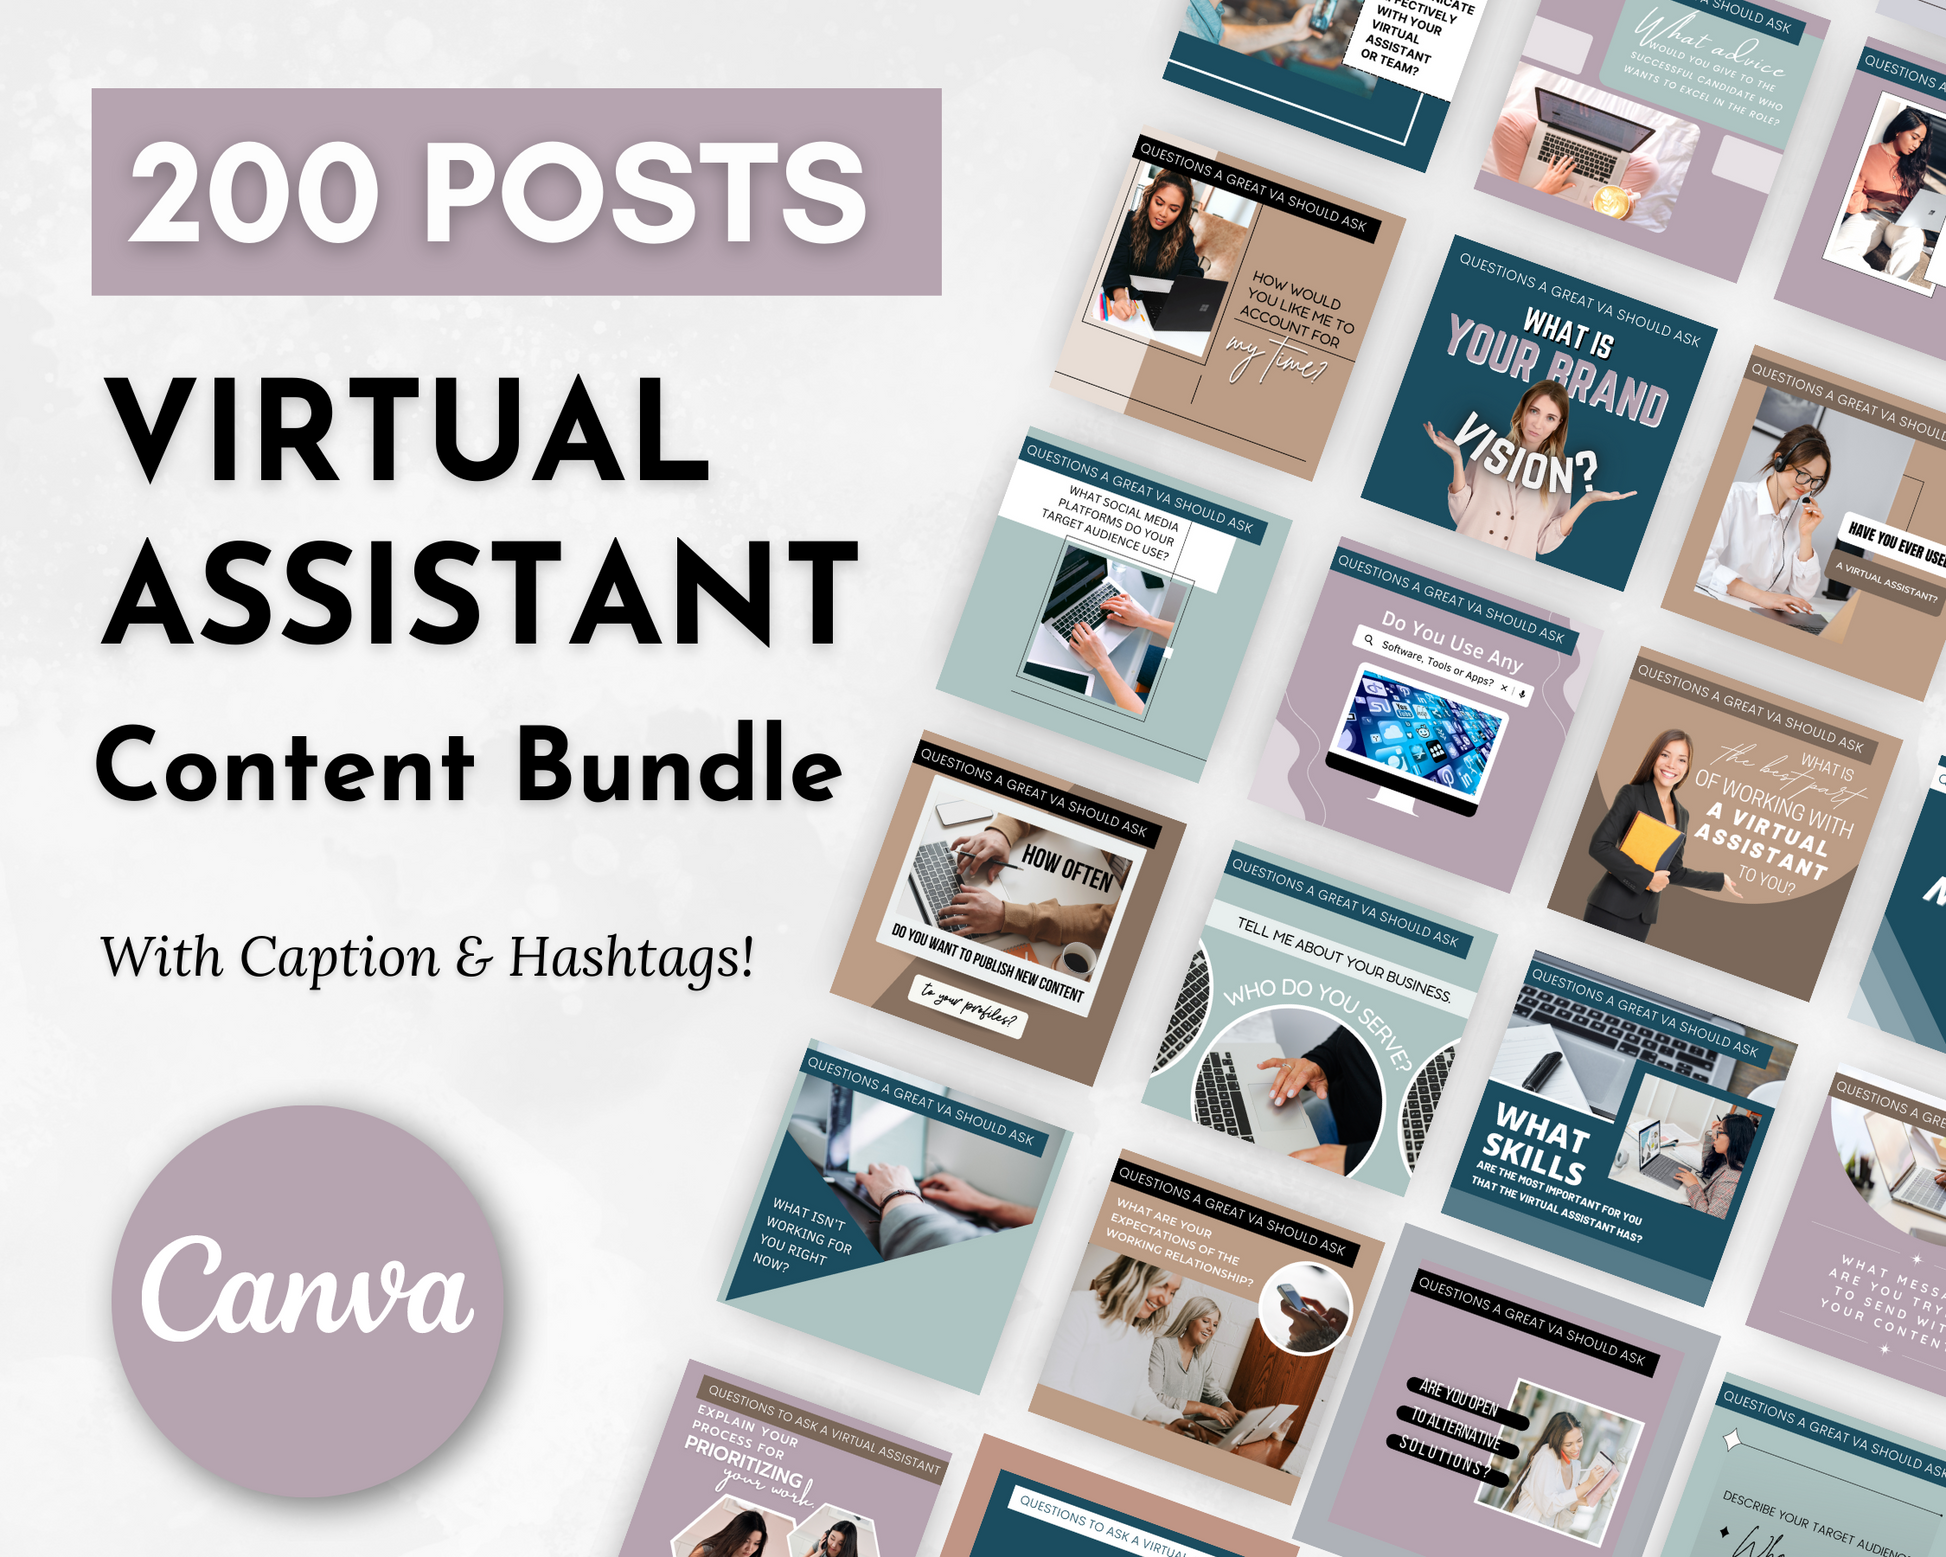 200 Socially Inclined virtual assistant content assistant bundle with Canva templates.